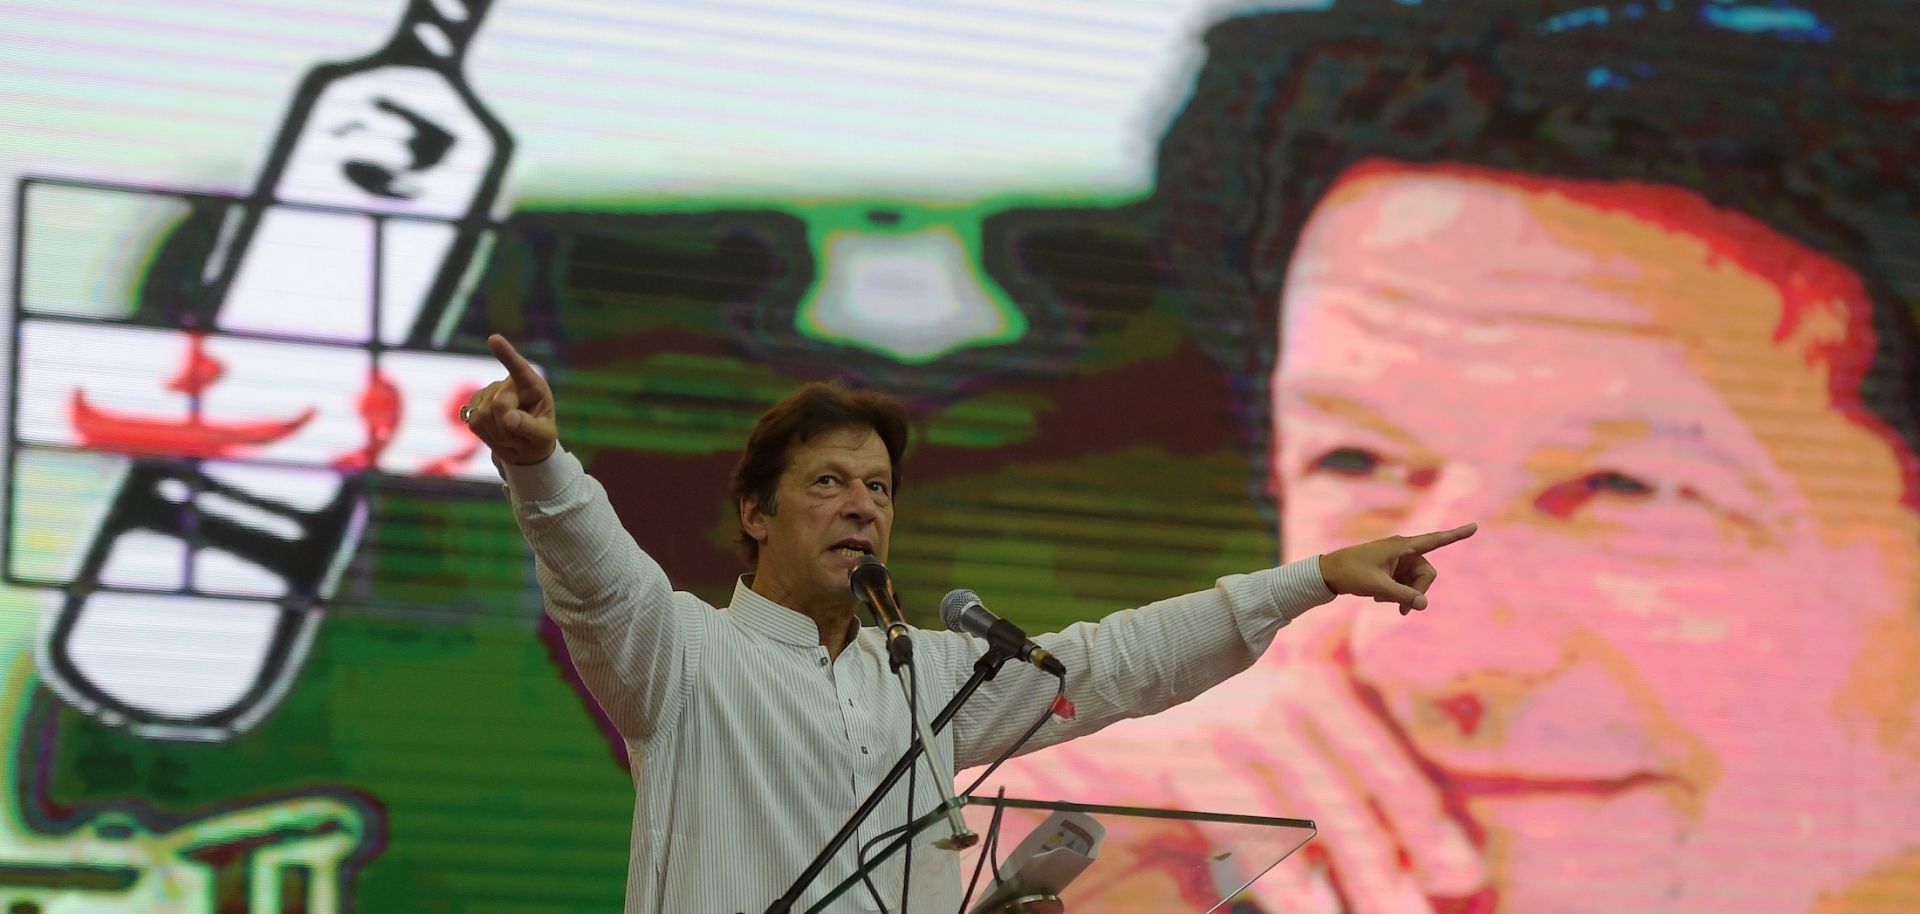 Imran Khan, a former cricketer and leader of the Pakistan Tehreek-e-Insaf party, rallies supporters during a campaign event June 30, 2018, less than a month before his election as Pakistan's new prime minister.